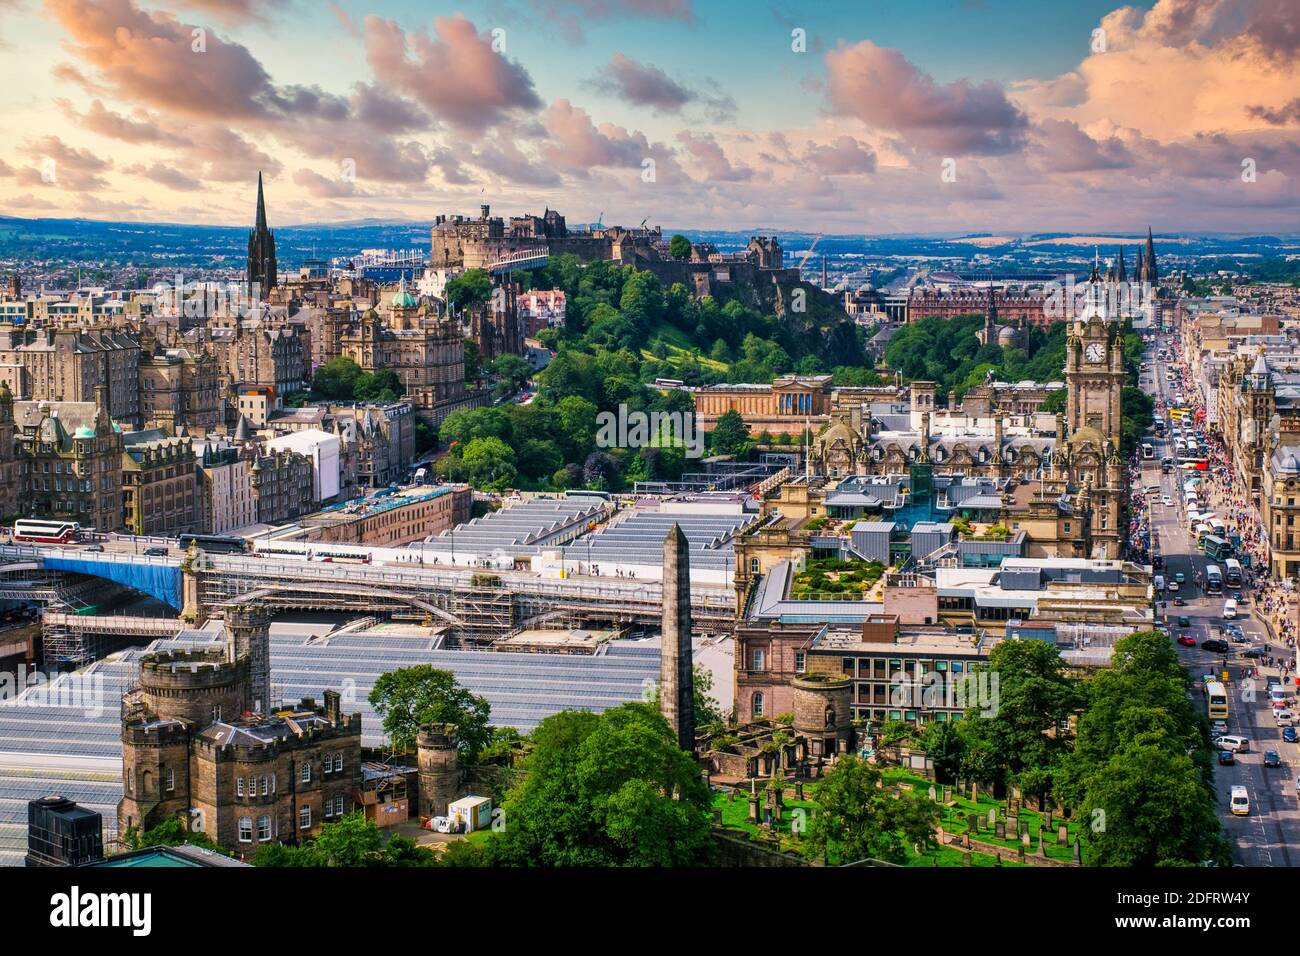 The city of Edinburgh in Scotland at sunset - With a view of the Edinburgh Csatle and several landmarks Stock Photo